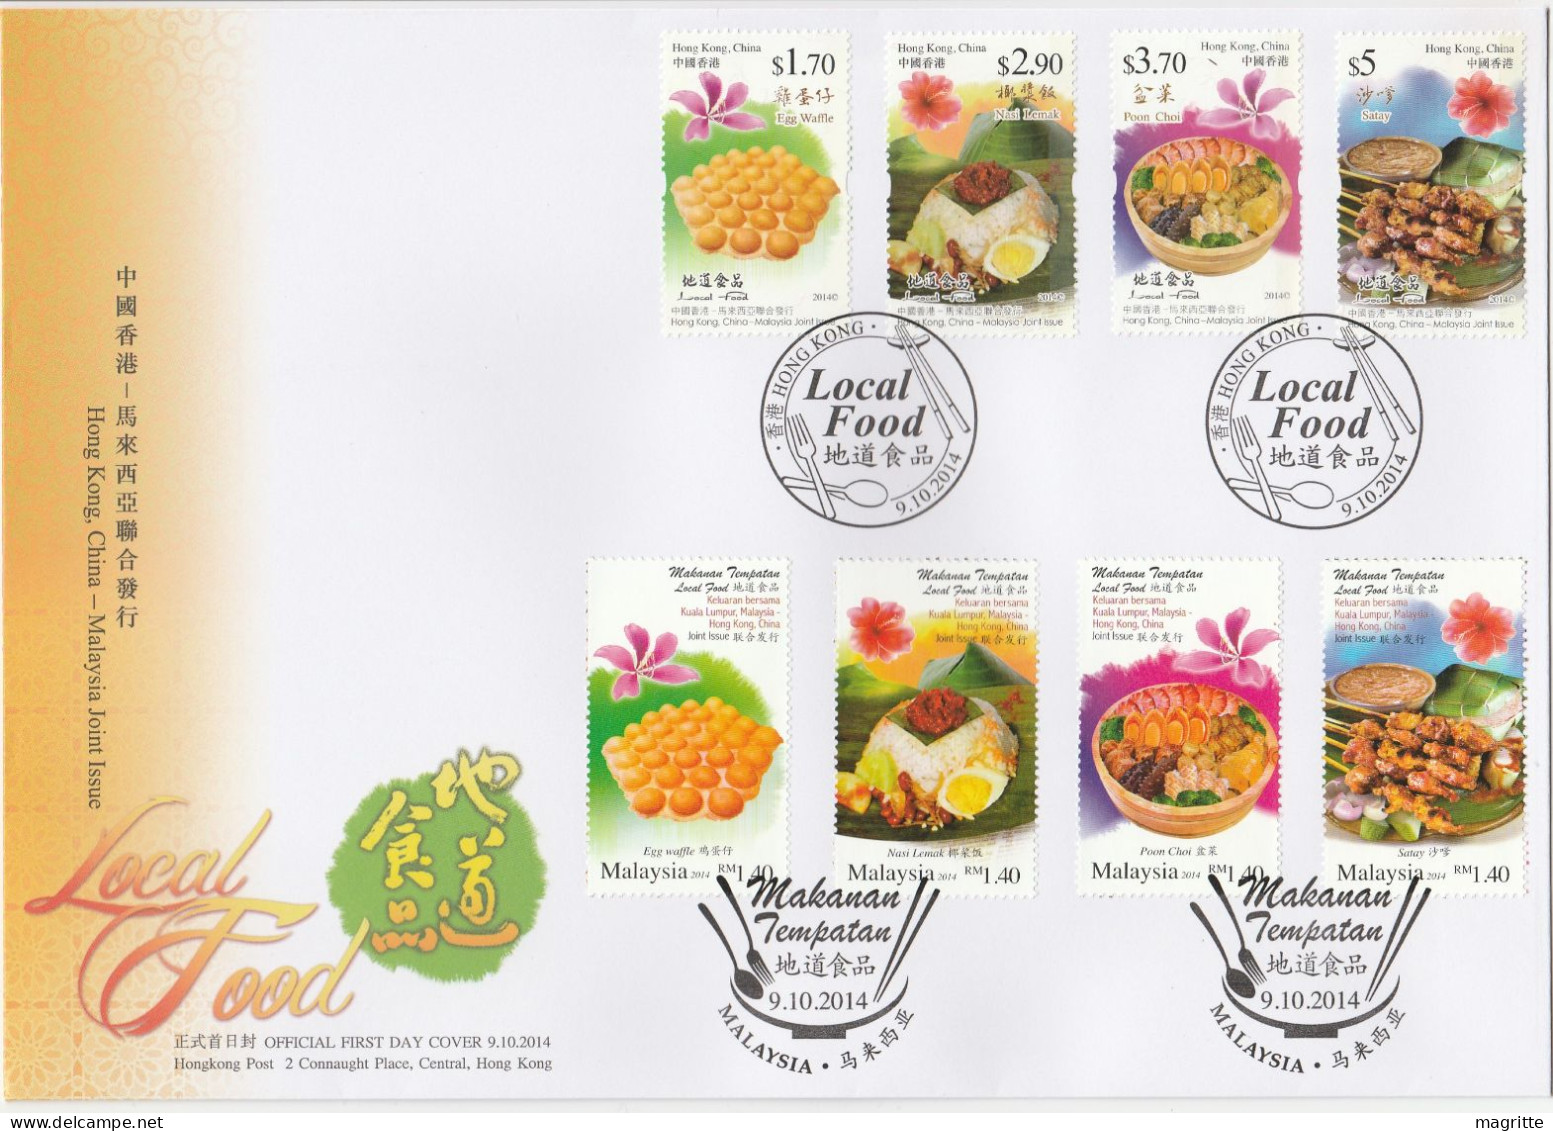 Hong Kong Malaisie 2014 FDC Mixte Emission Commune Gastronomie Hongkong Malaysia Joint Issue Local Food Mixed FDC - Emissions Communes